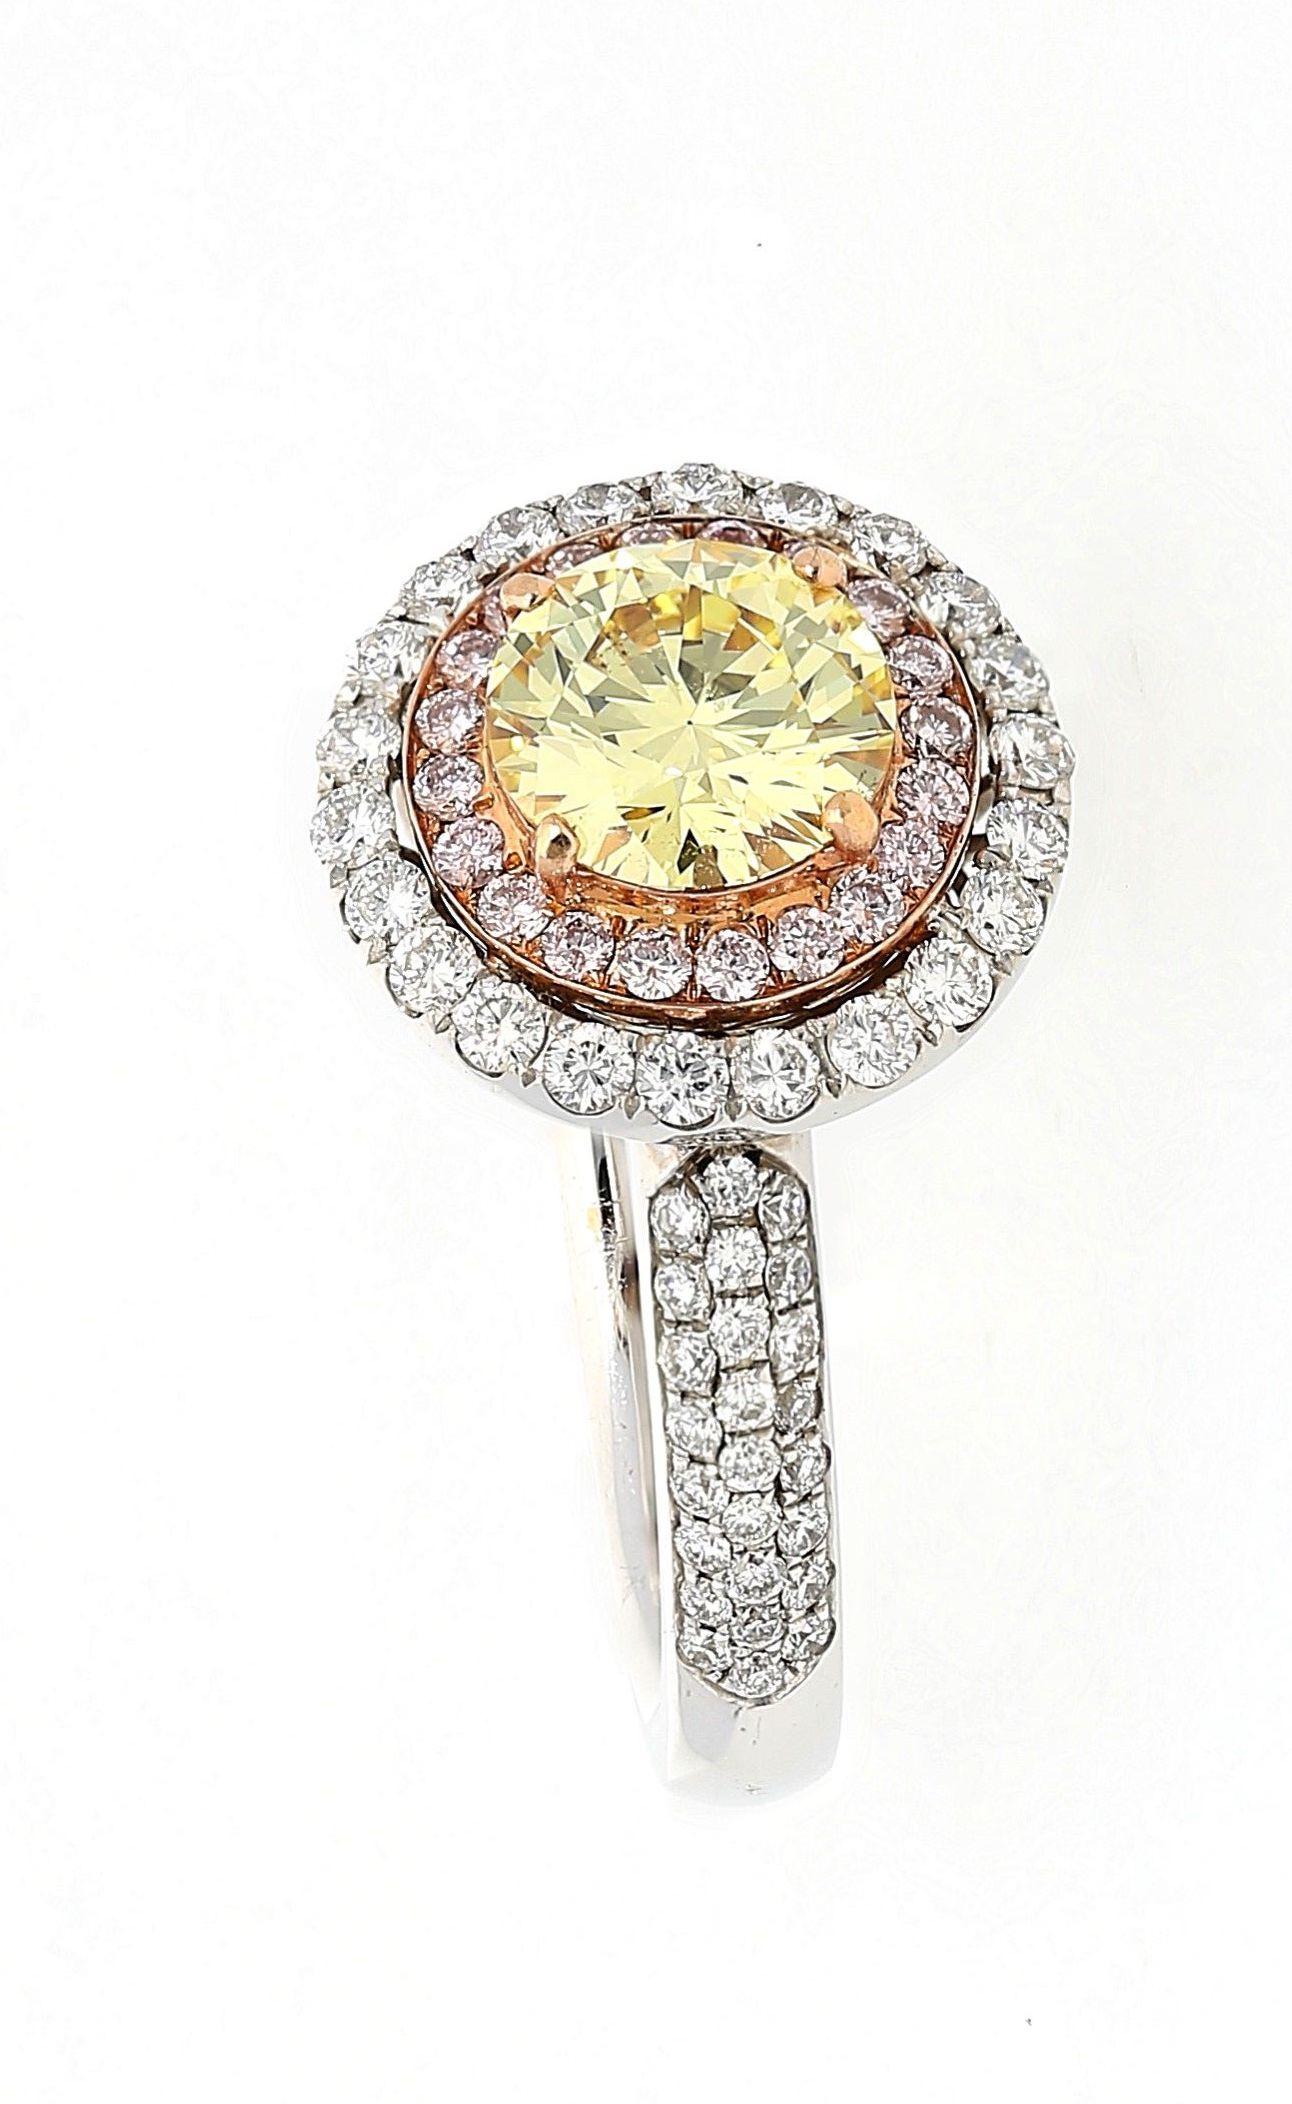 Round Cut GIA Certified 1.01 Carat Fancy Yellow, Pink and White Diamond Ring For Sale